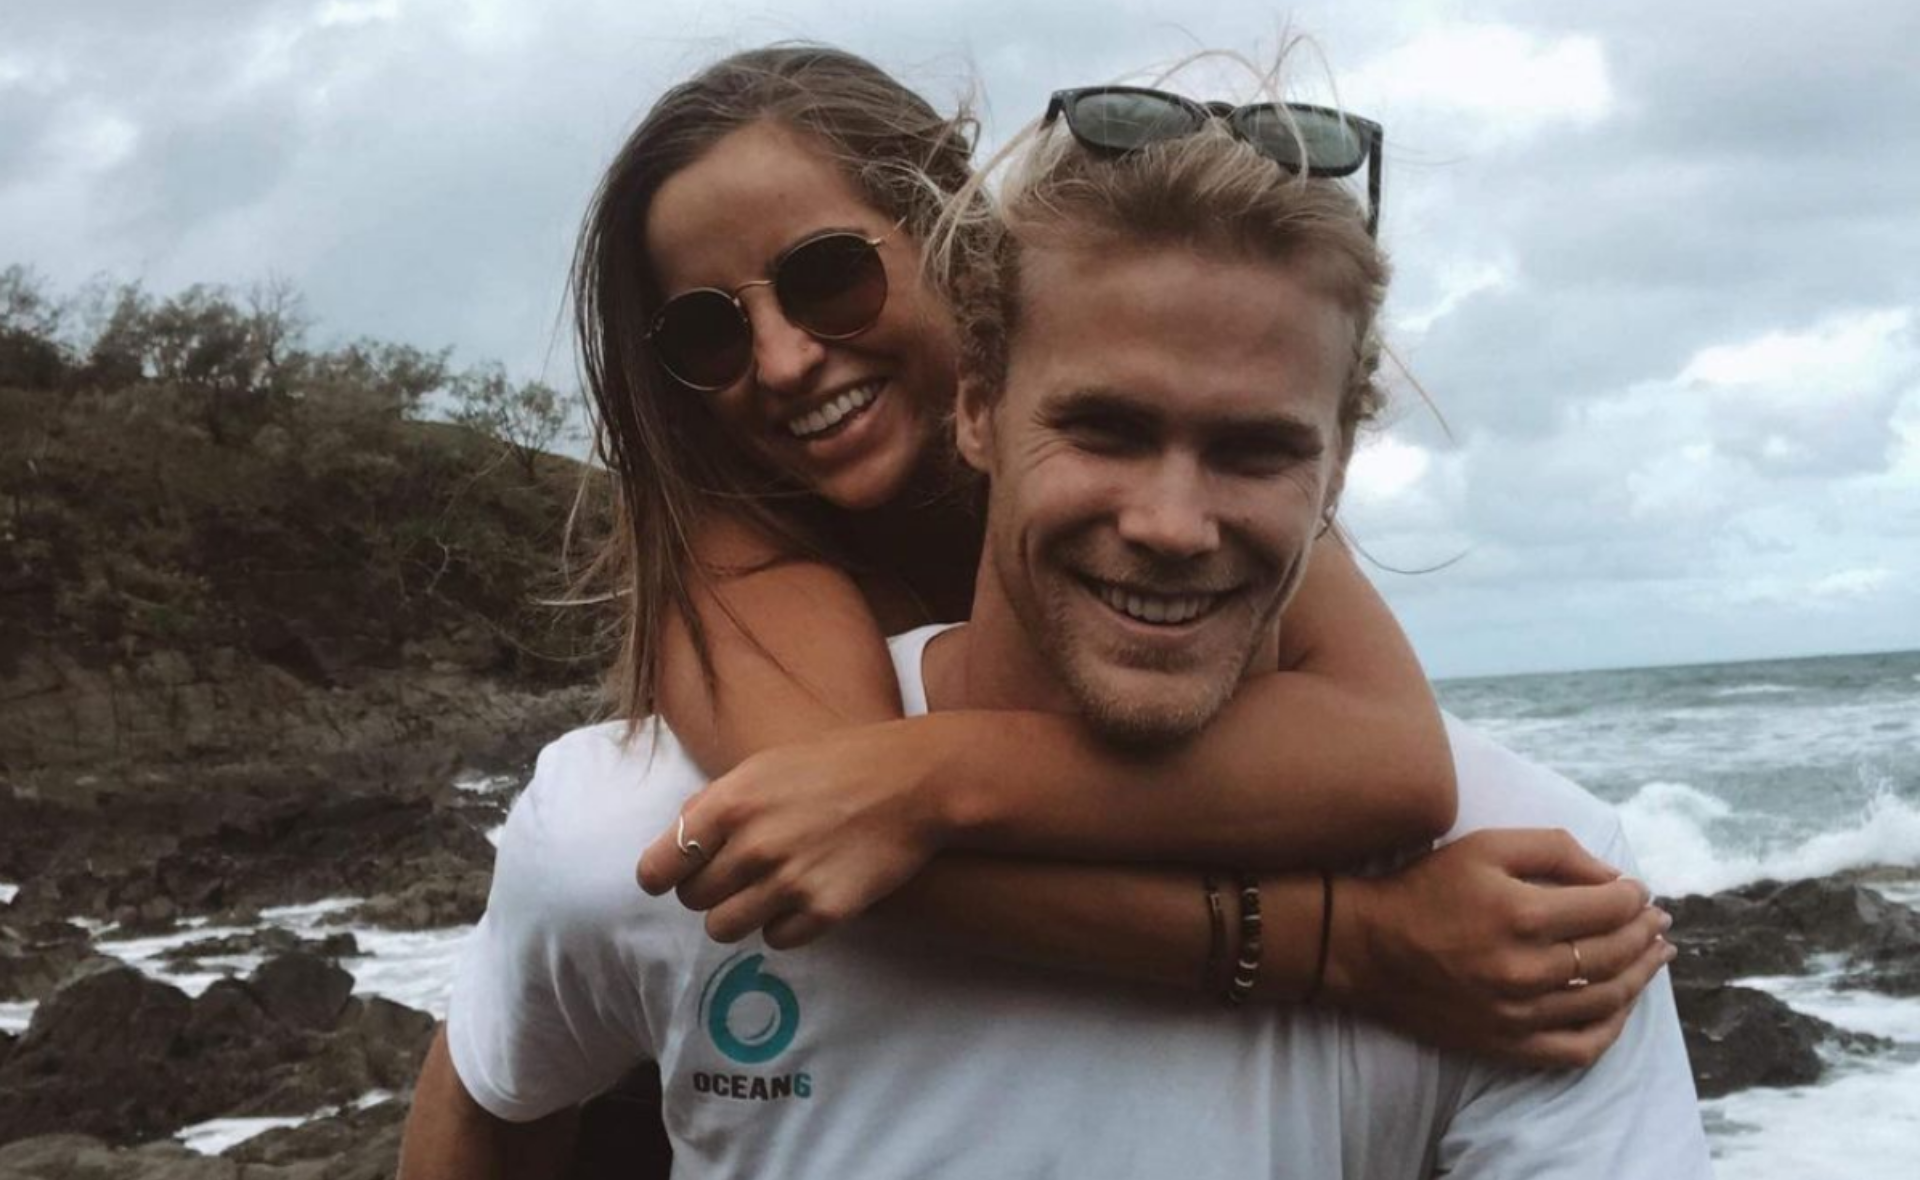 It’s a love story! Take a look back on Jett Kenny’s relationship timeline